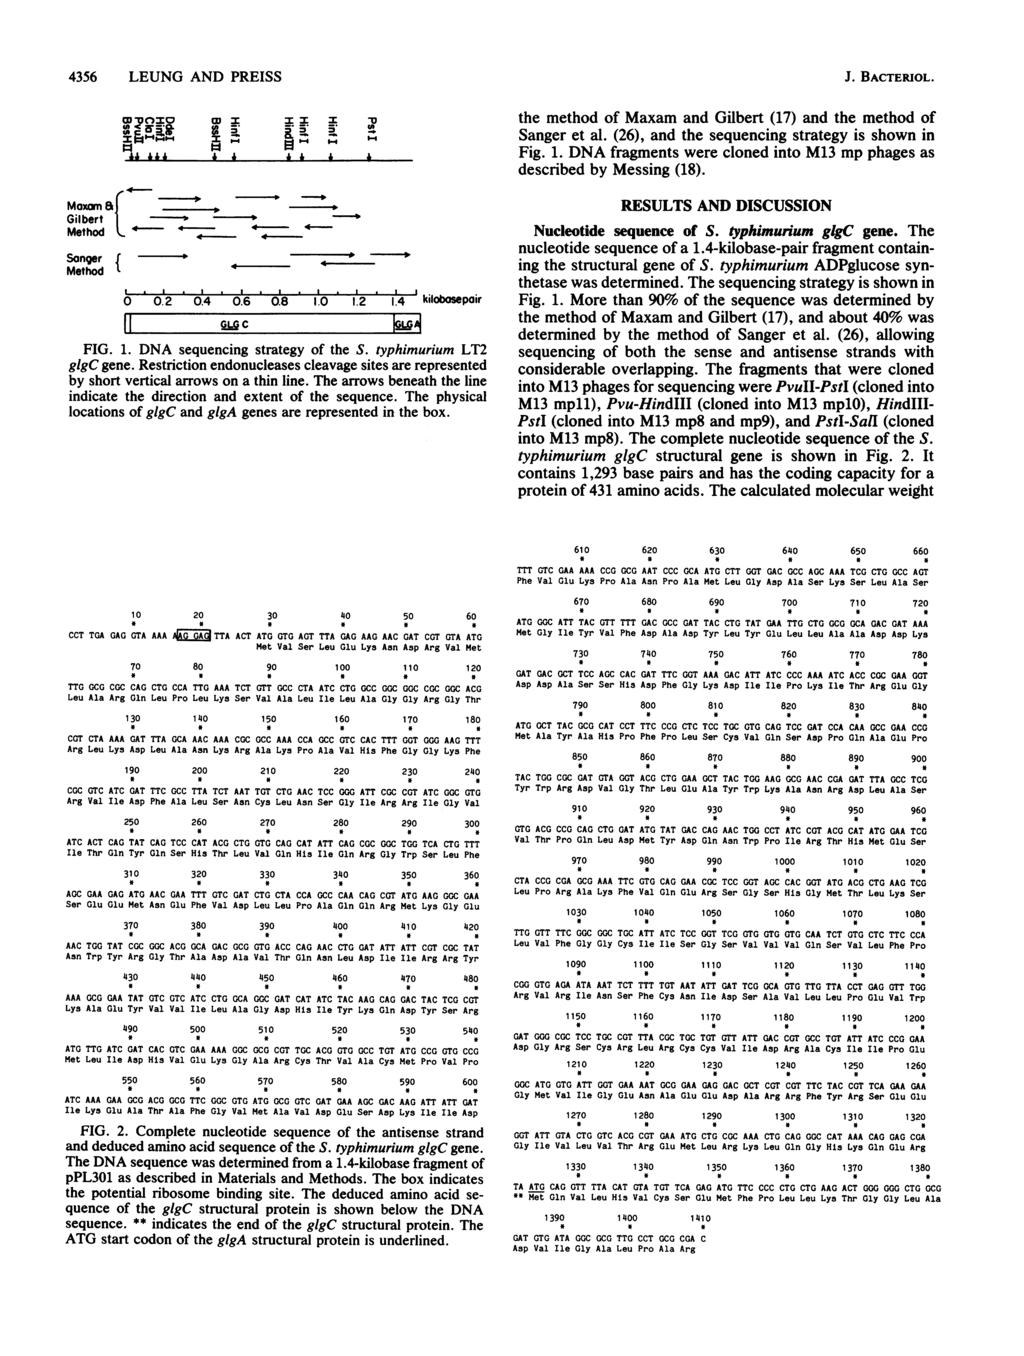 &M, 4356 LEUNG AND PREISS W'OOXD I IL IL I Maxam a, Gilbert 1. - Method < ' - = Songer { Method1 0 0.2 0.4 0.6 0.8 1.0 1.2 1.4 kilobosepoir FIG. 1. DNA sequencing strategy of the S.